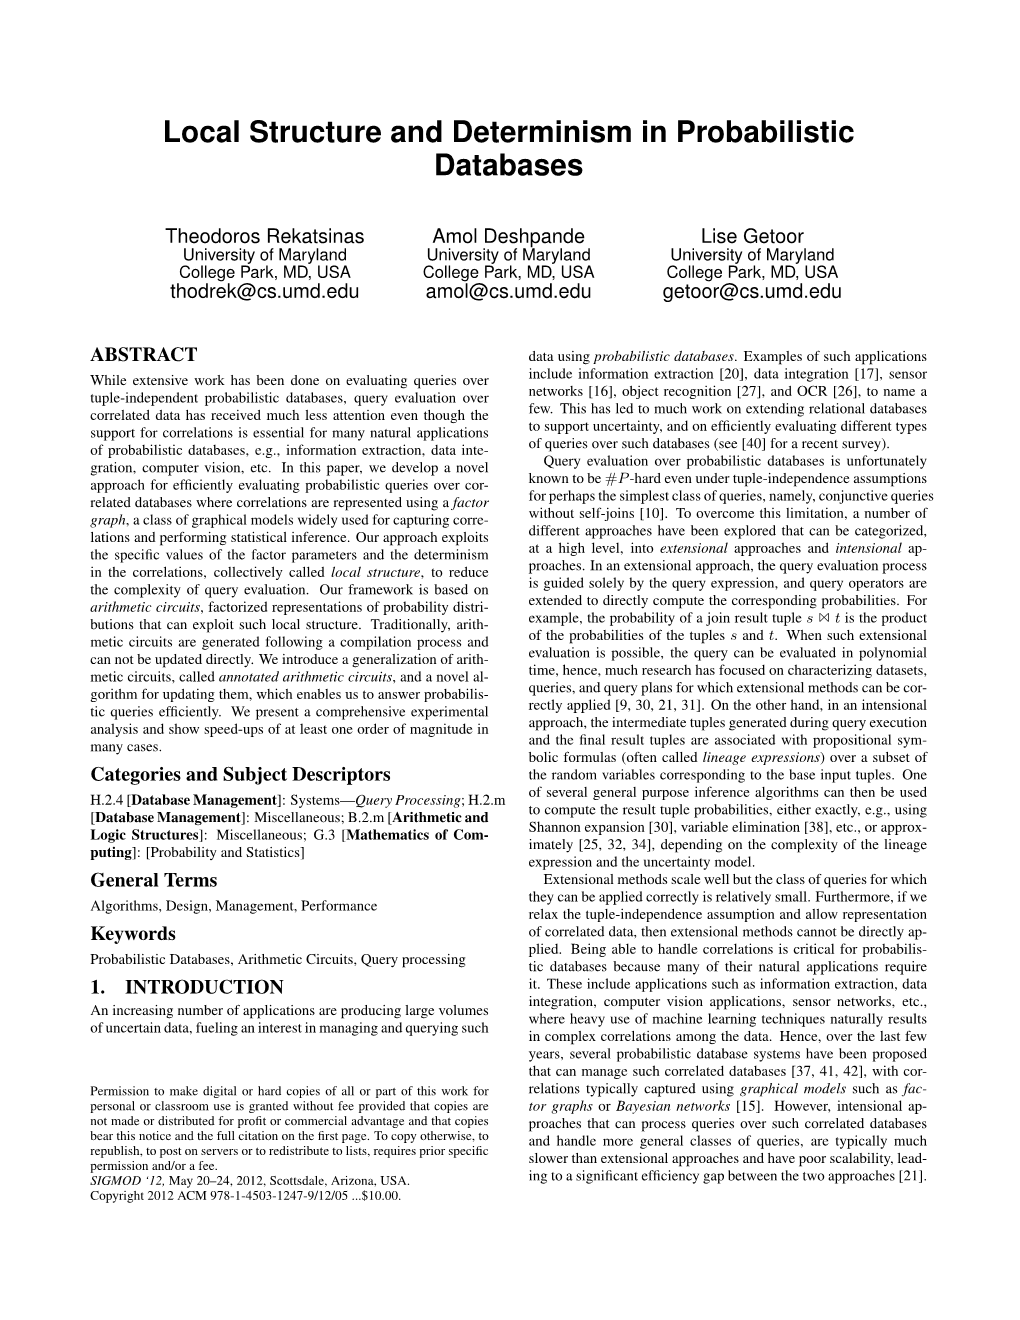 Local Structure and Determinism in Probabilistic Databases